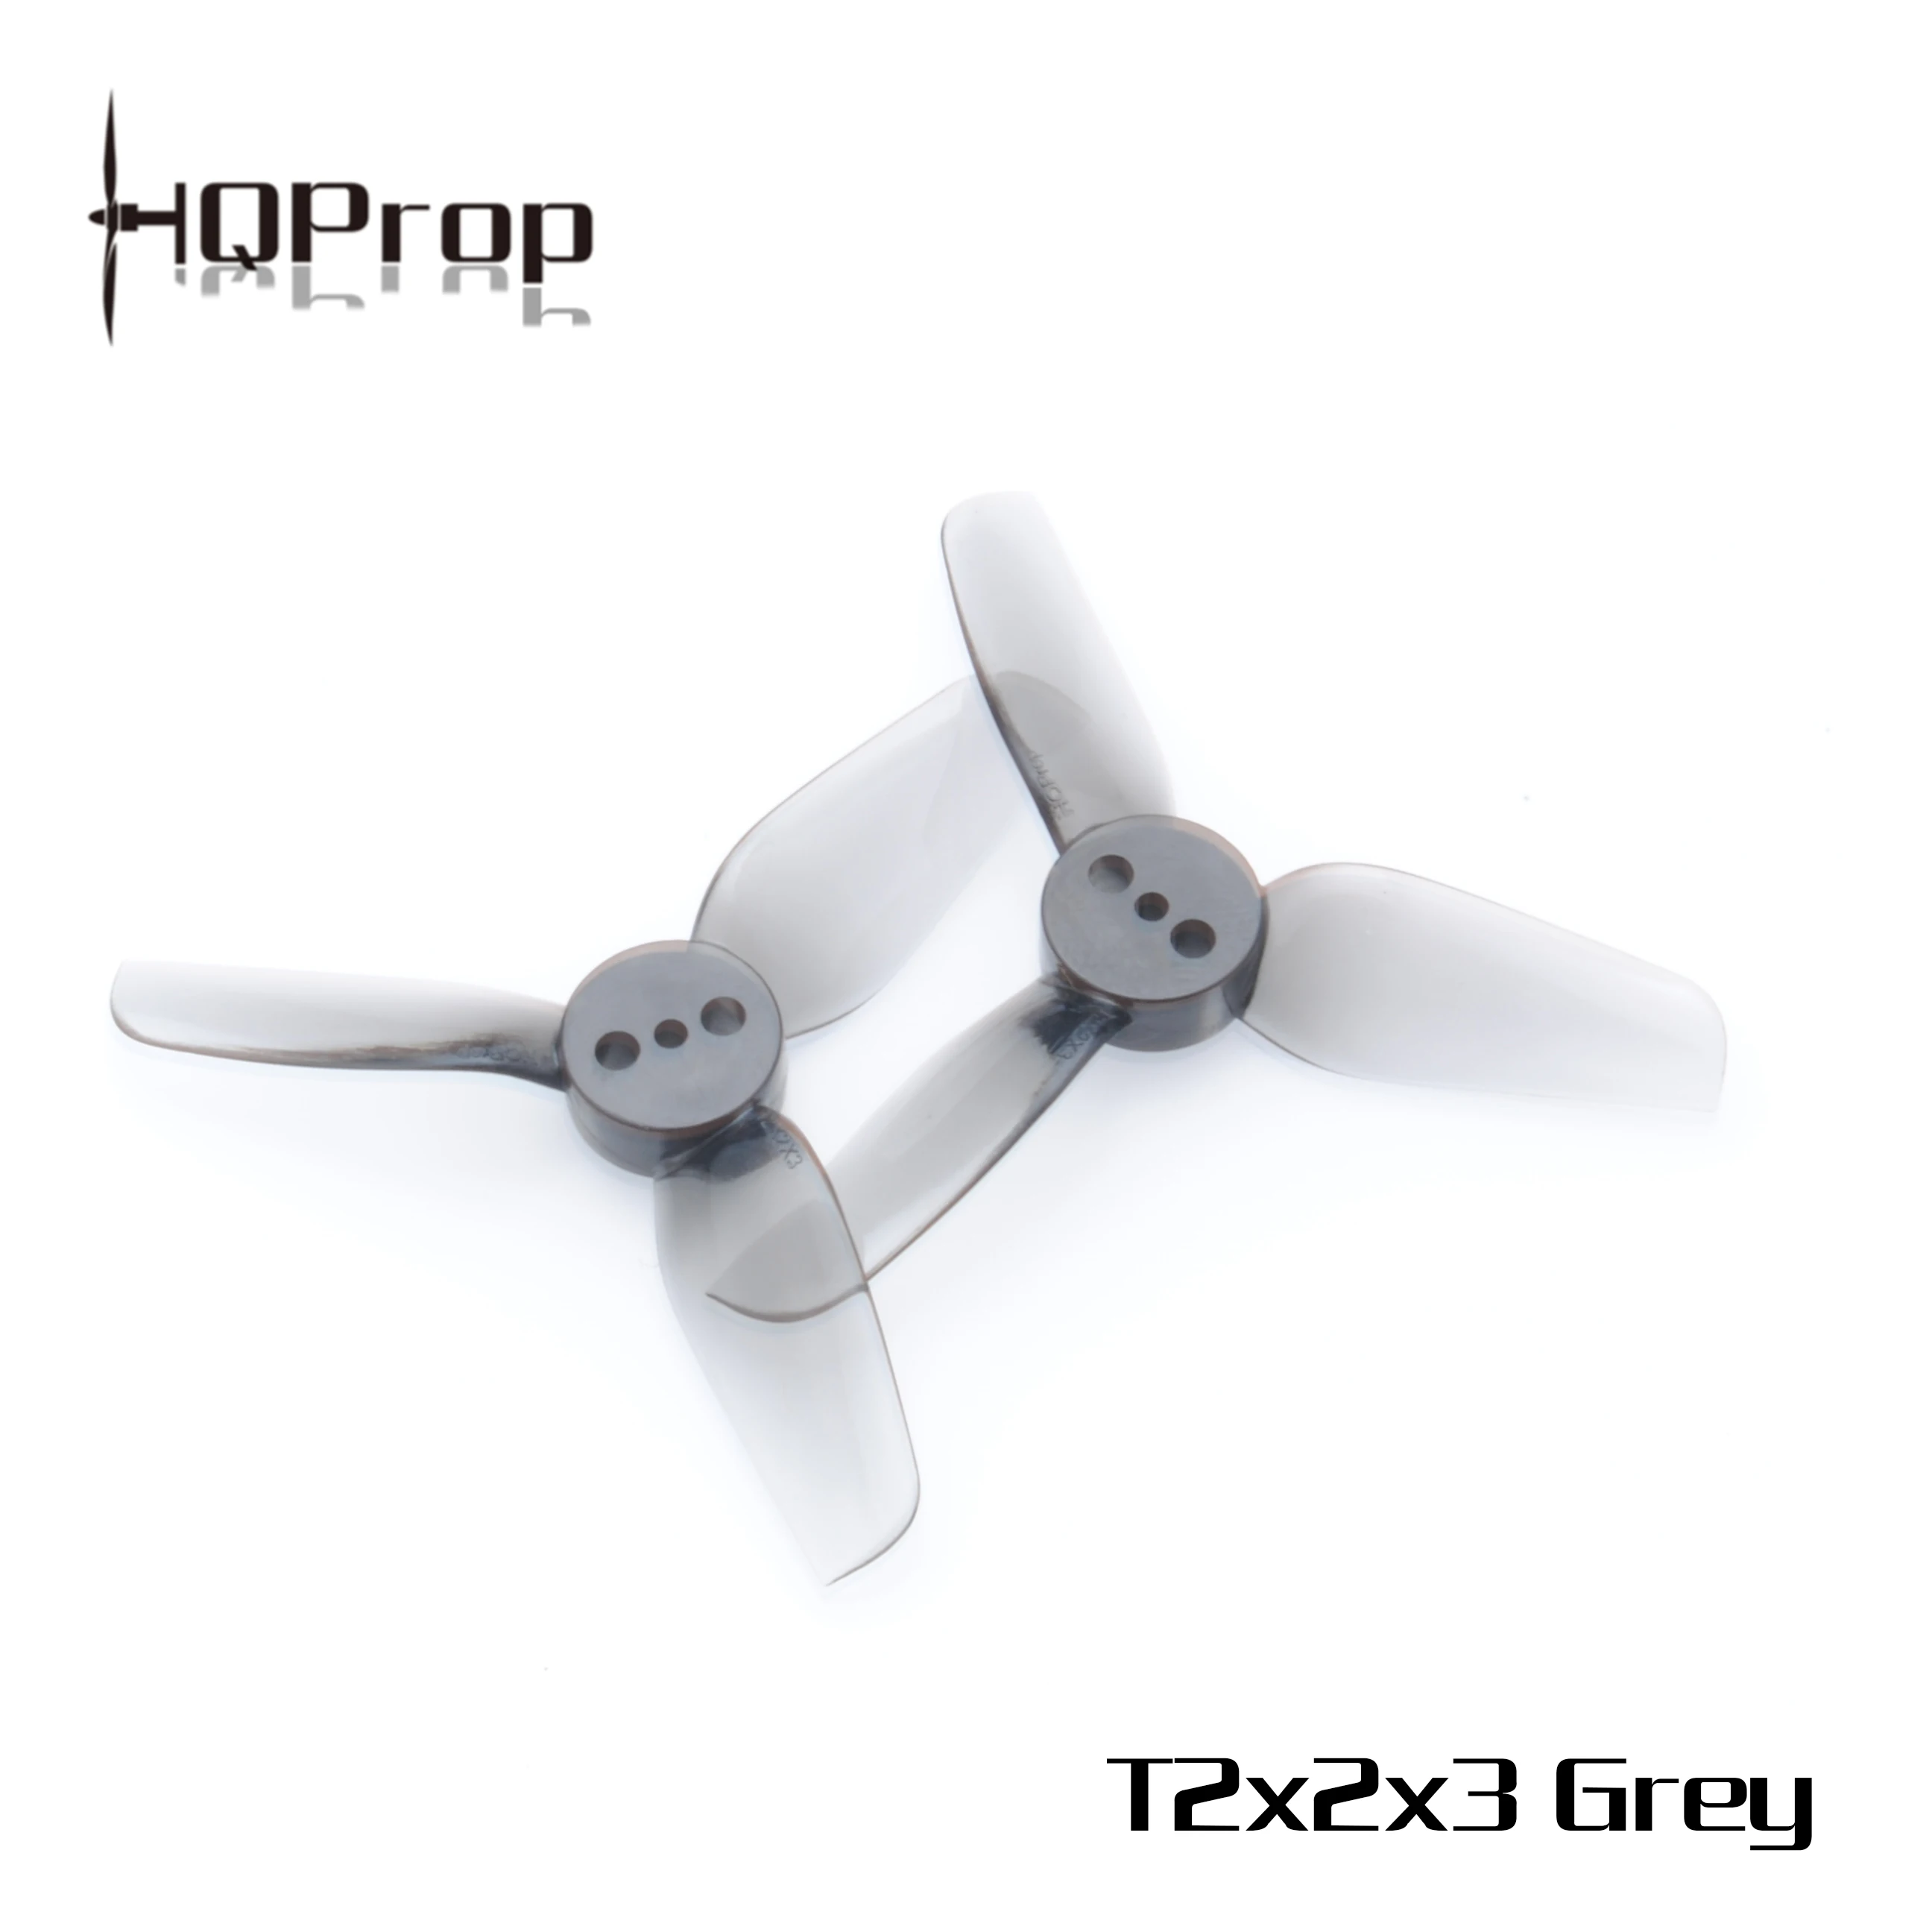 

6paris HQ Prop T2X2X3 PC 2inch 3 Blade Propeller paddle (two forward and two reverse) small blade crossing machine is durable